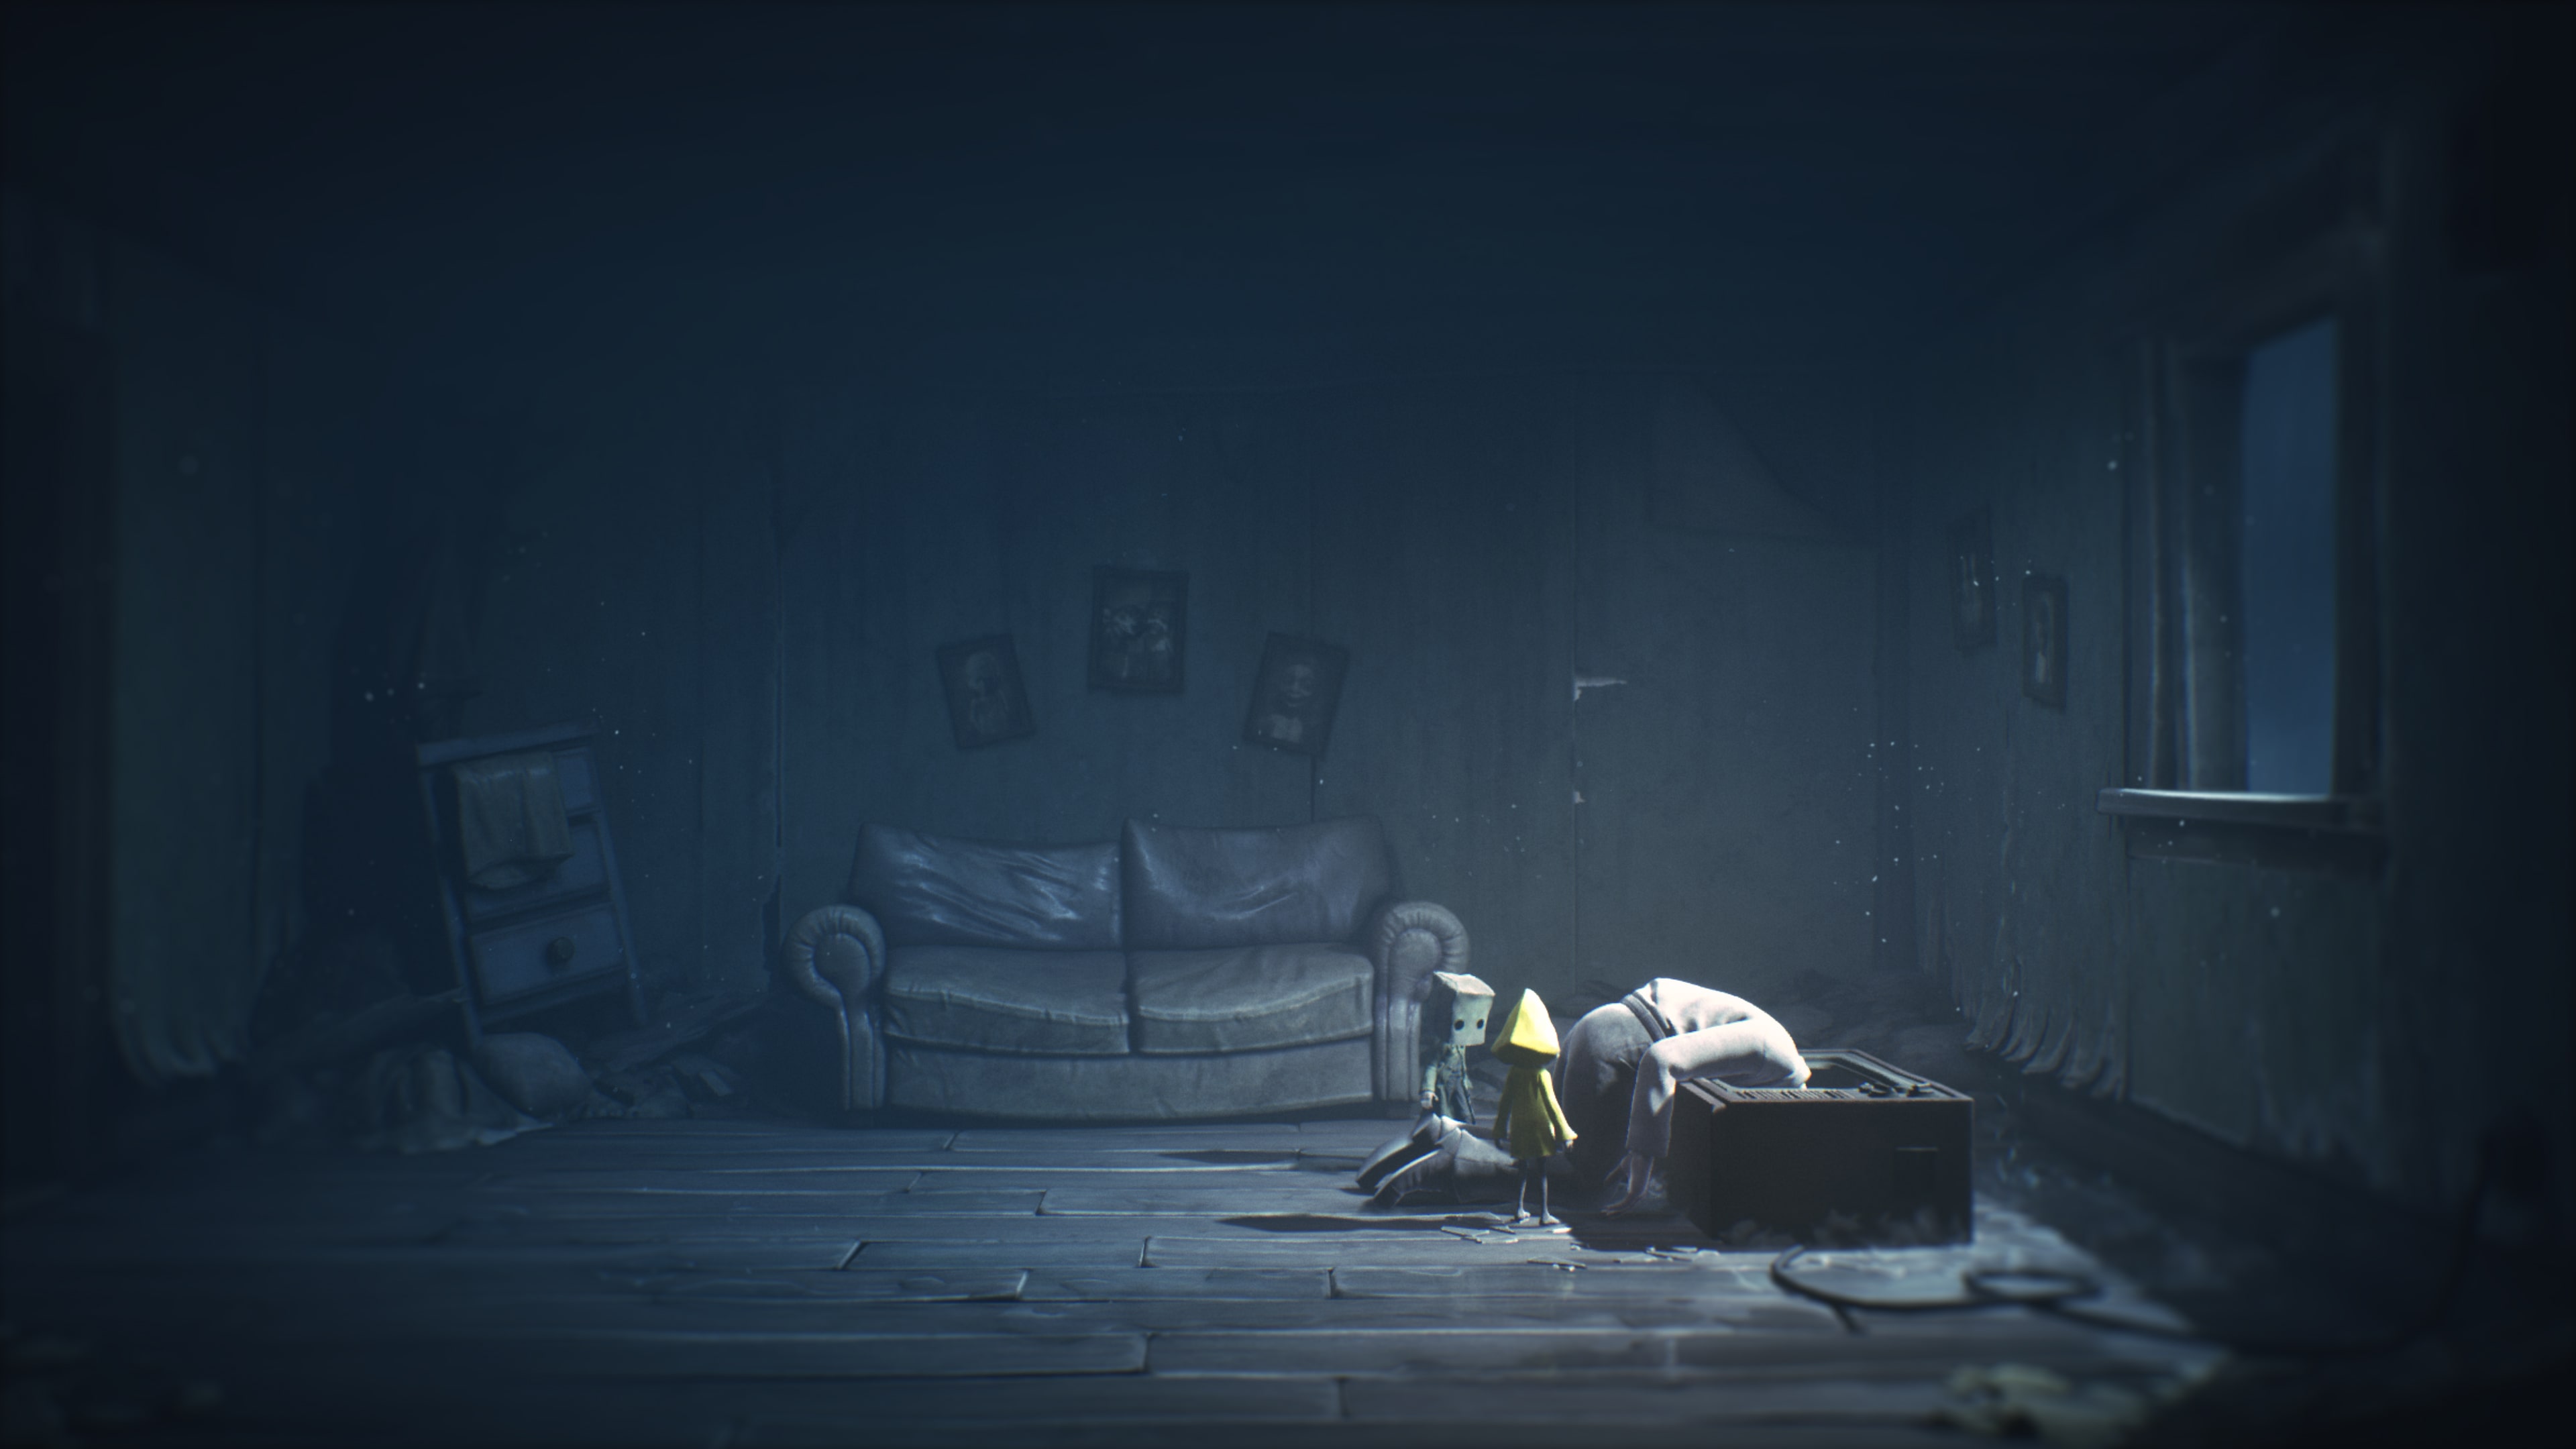 Little Nightmares 2 (PS4/PS5) review